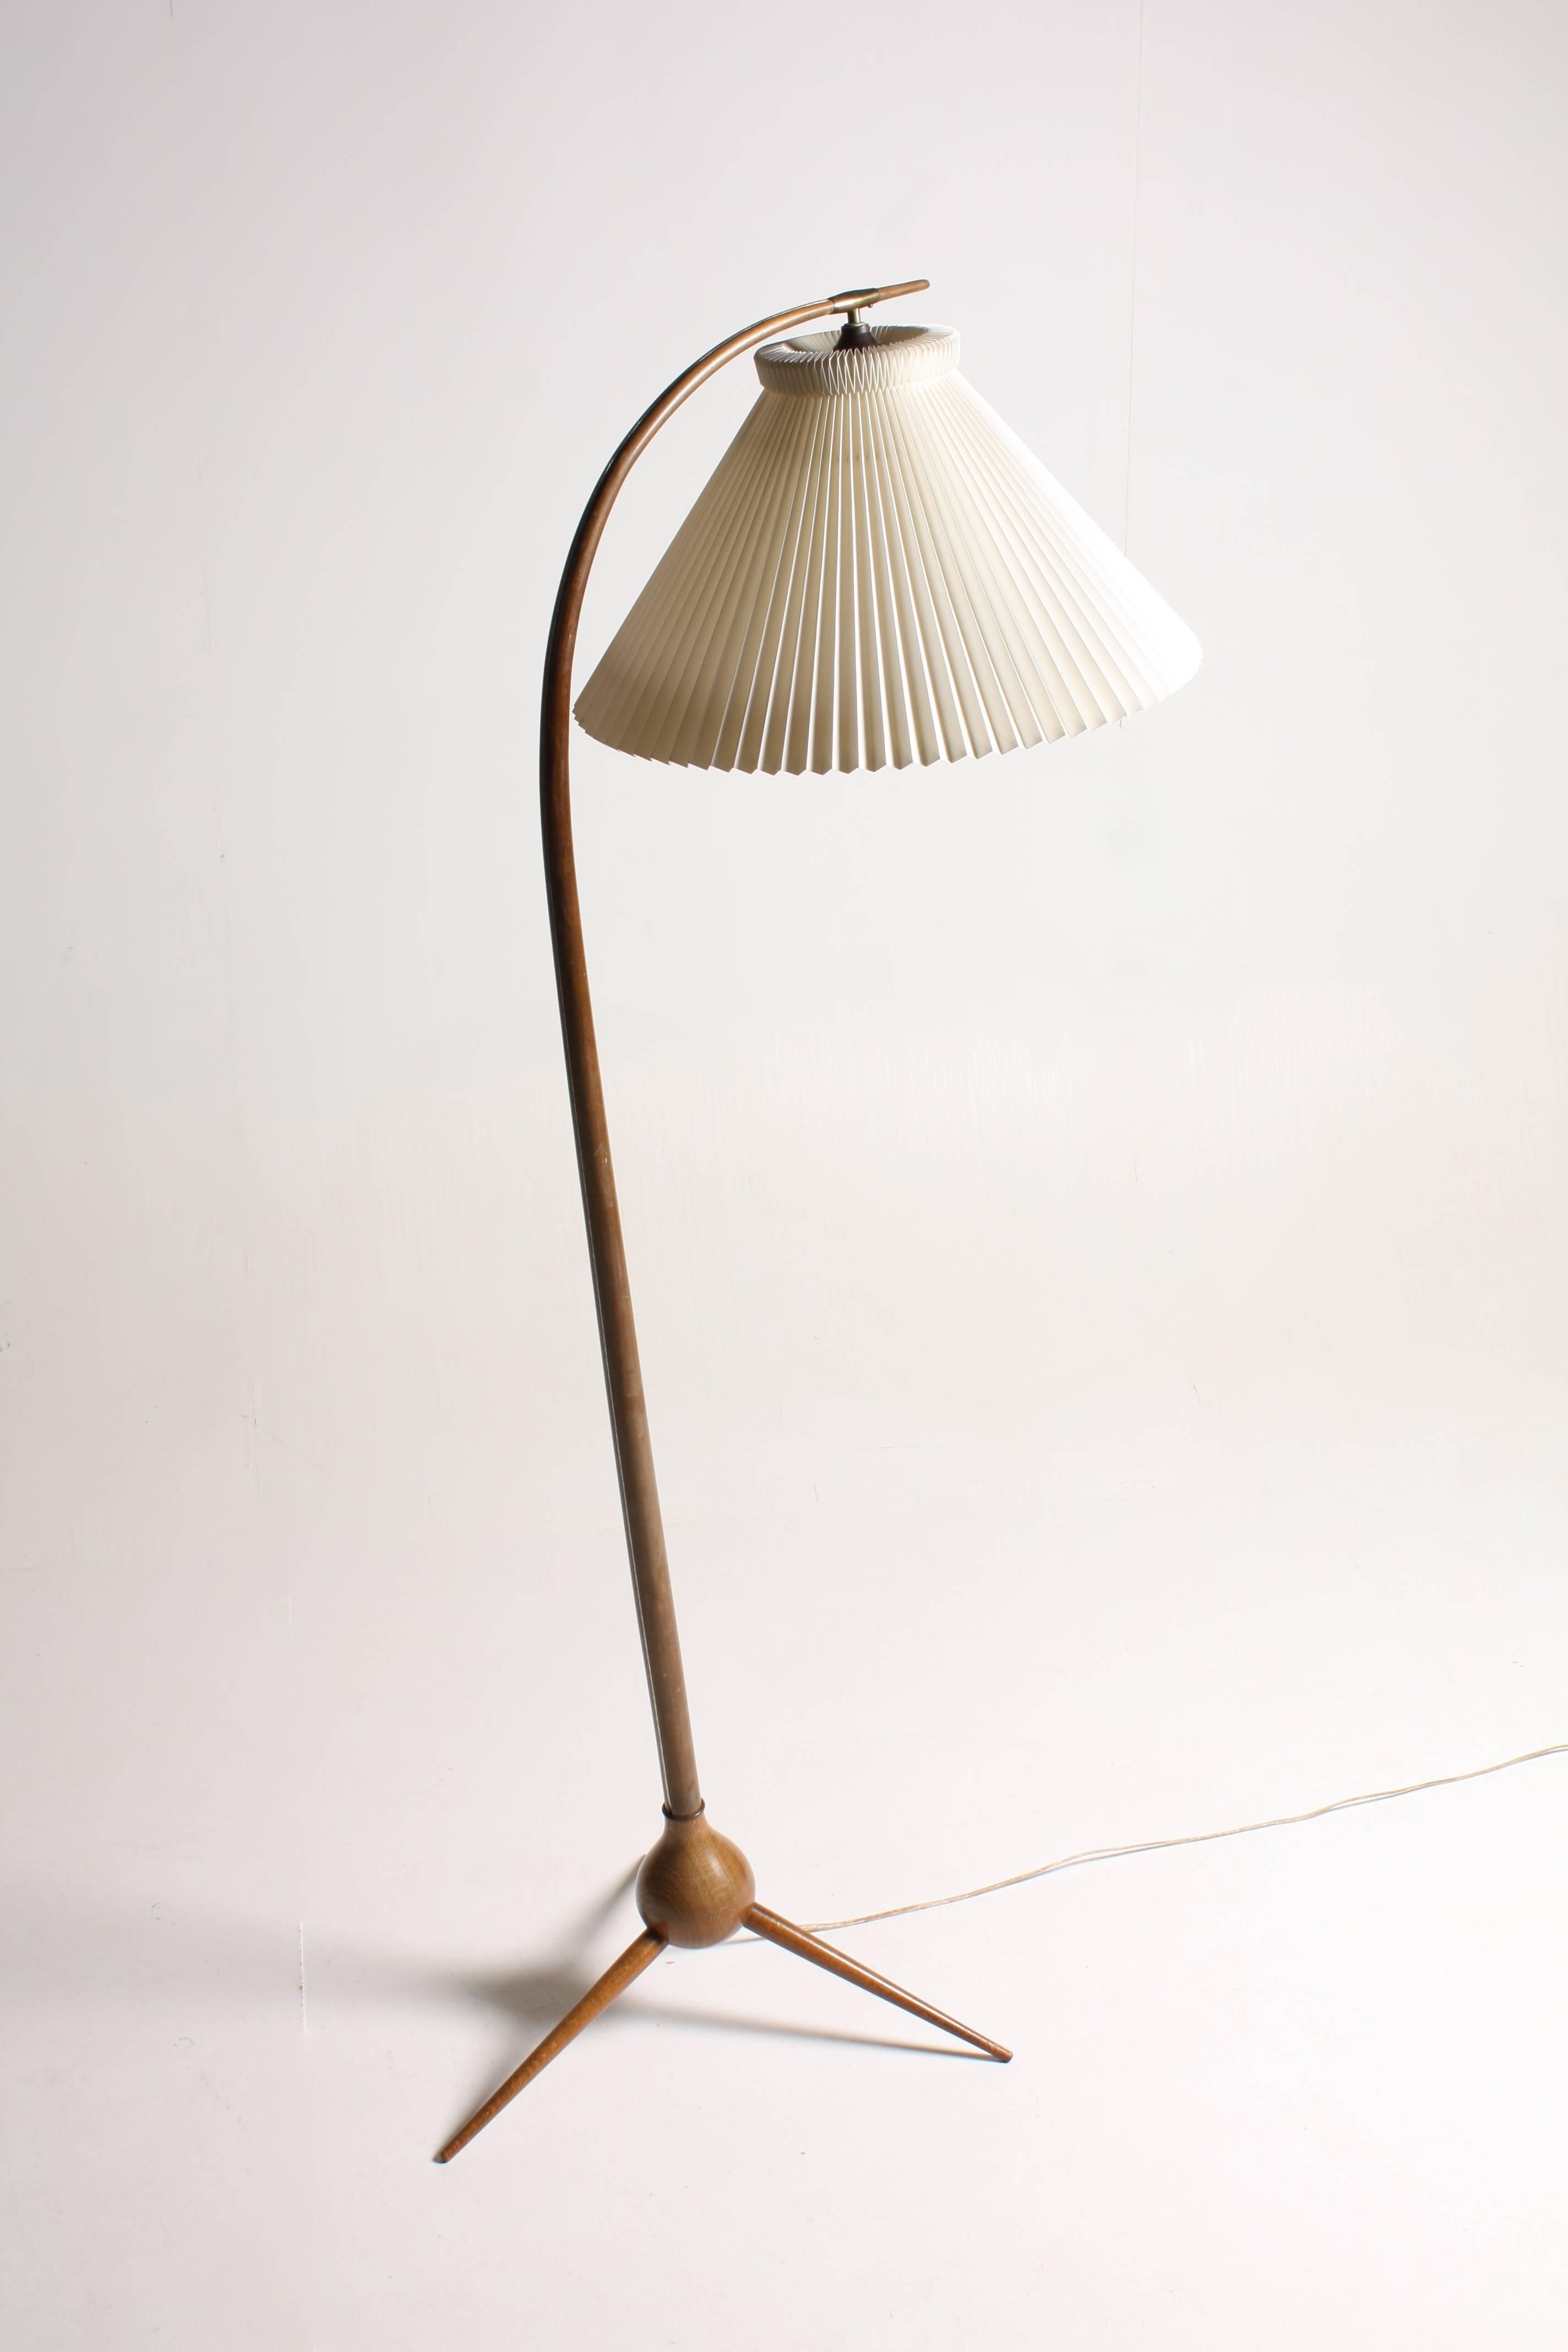 Elegant floor lamp in stained beech, comes with Le Klint lampshade. Designed by Severin Hansen and made by Haslev furniture in the 1950s. Made in Denmark.